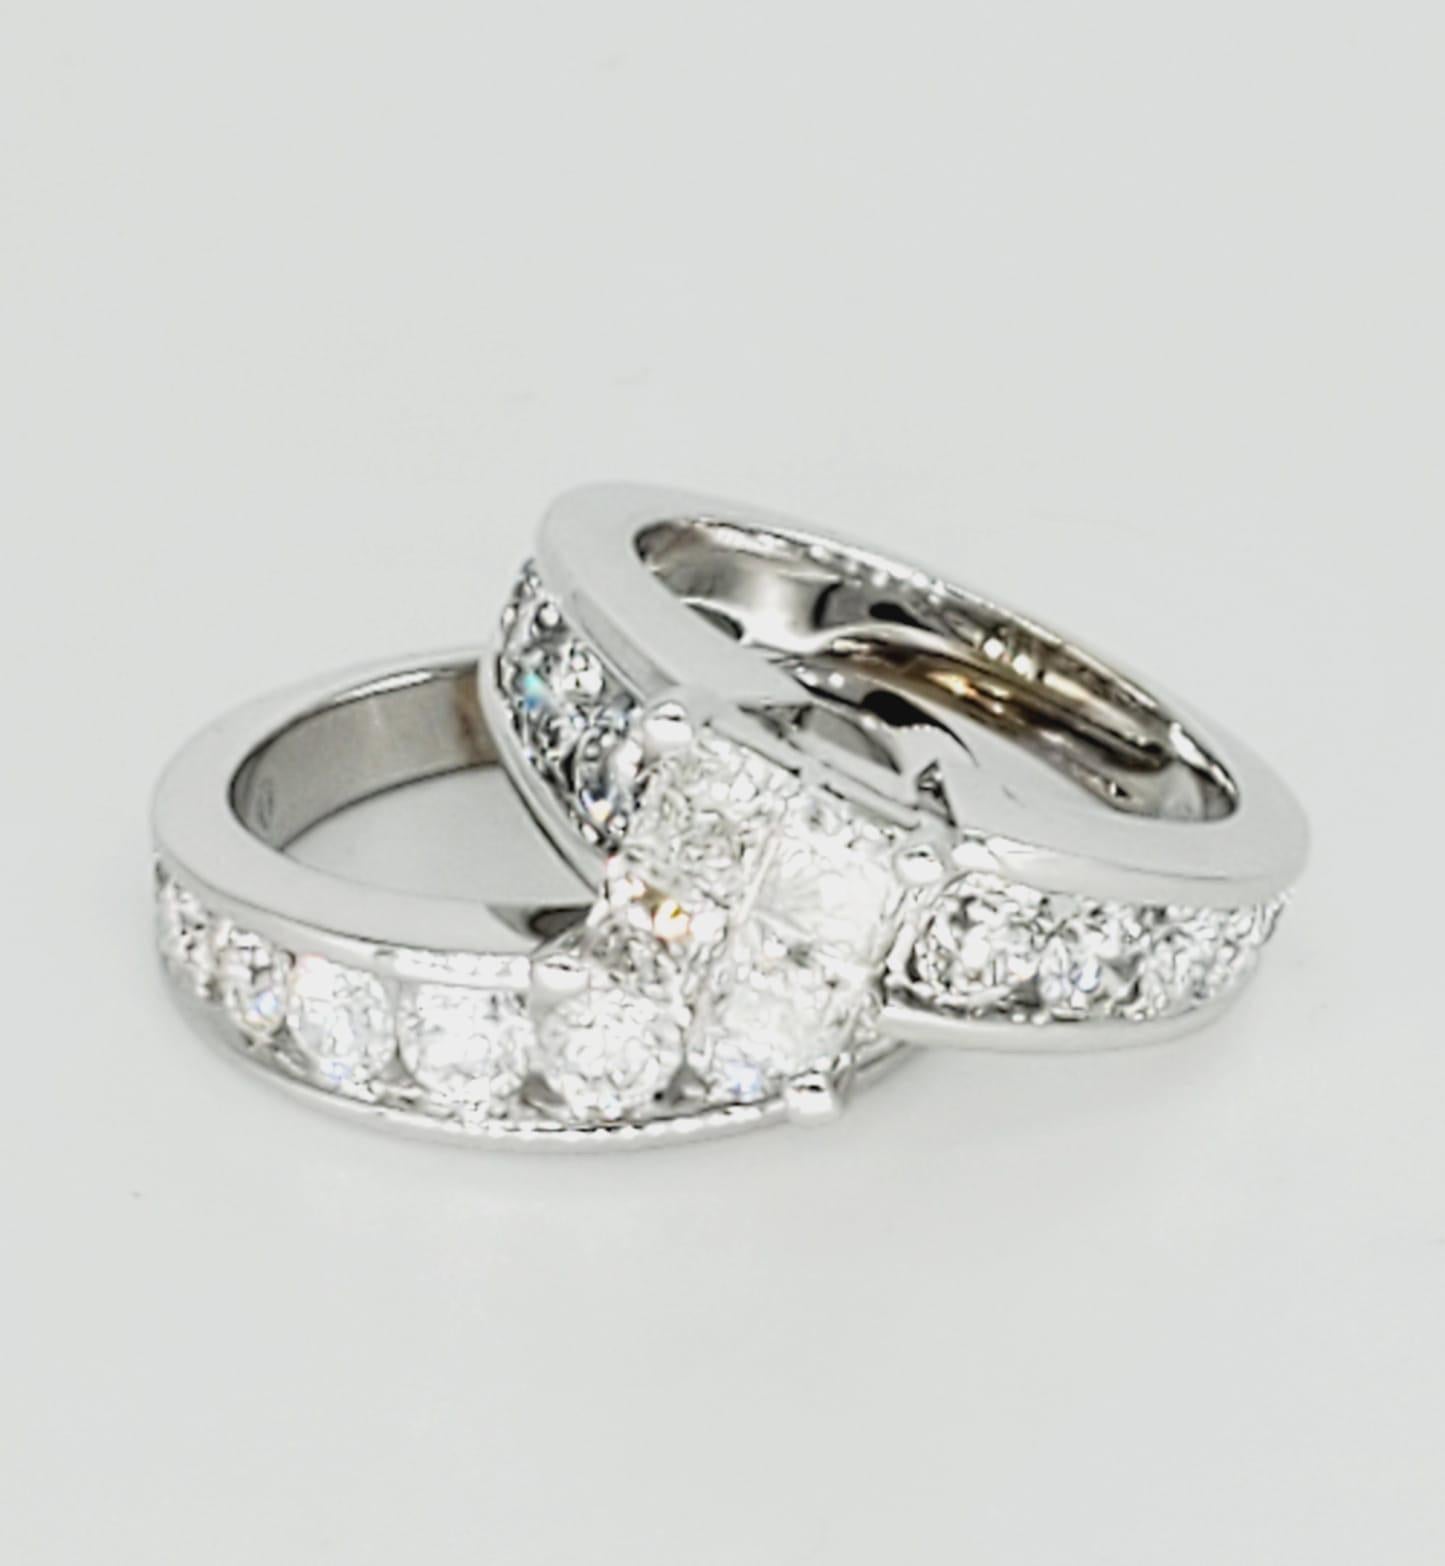 14 Karat White Gold 6.25 Carat Diamonds Channel Setting Engagement Ring Set In Excellent Condition For Sale In Miami, FL